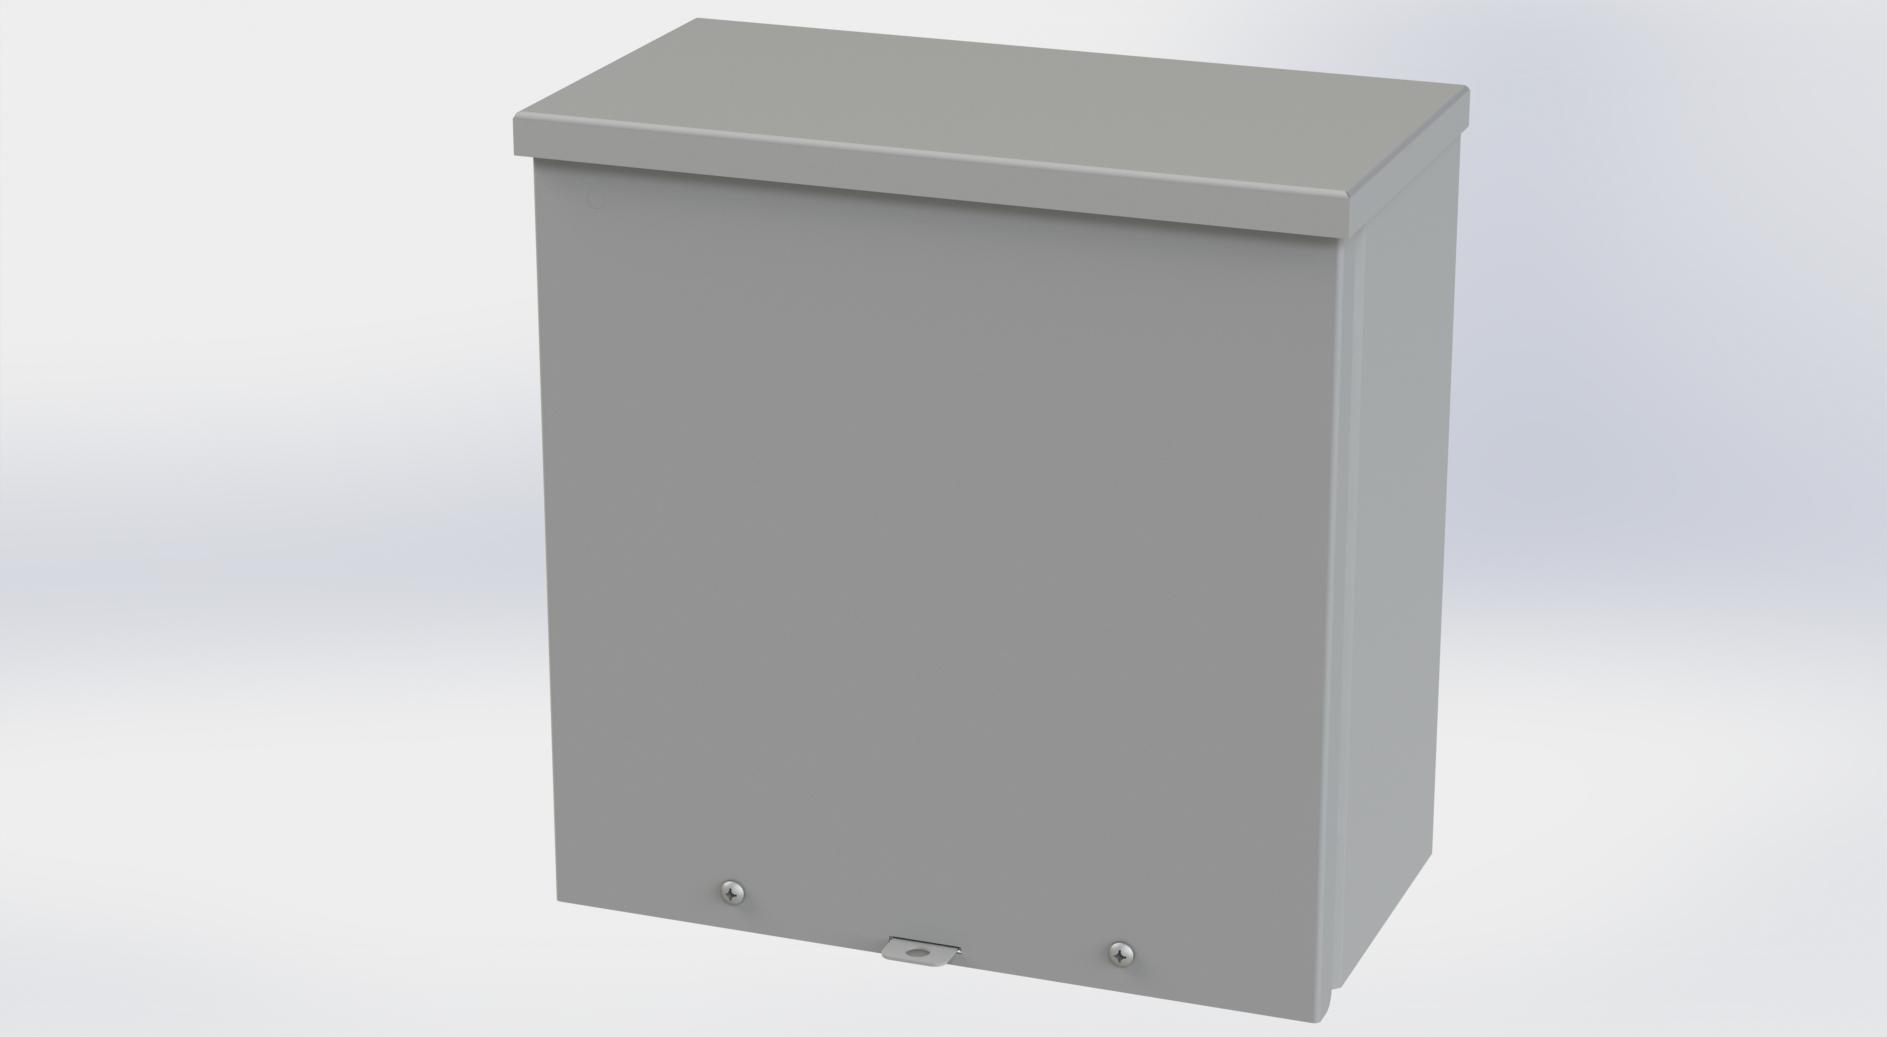 Saginaw Control SCE-12R126 Type-3R Screw Cover Enclosure, Height:12.00", Width:12.00", Depth:6.00", ANSI-61 gray powder coating inside and out.